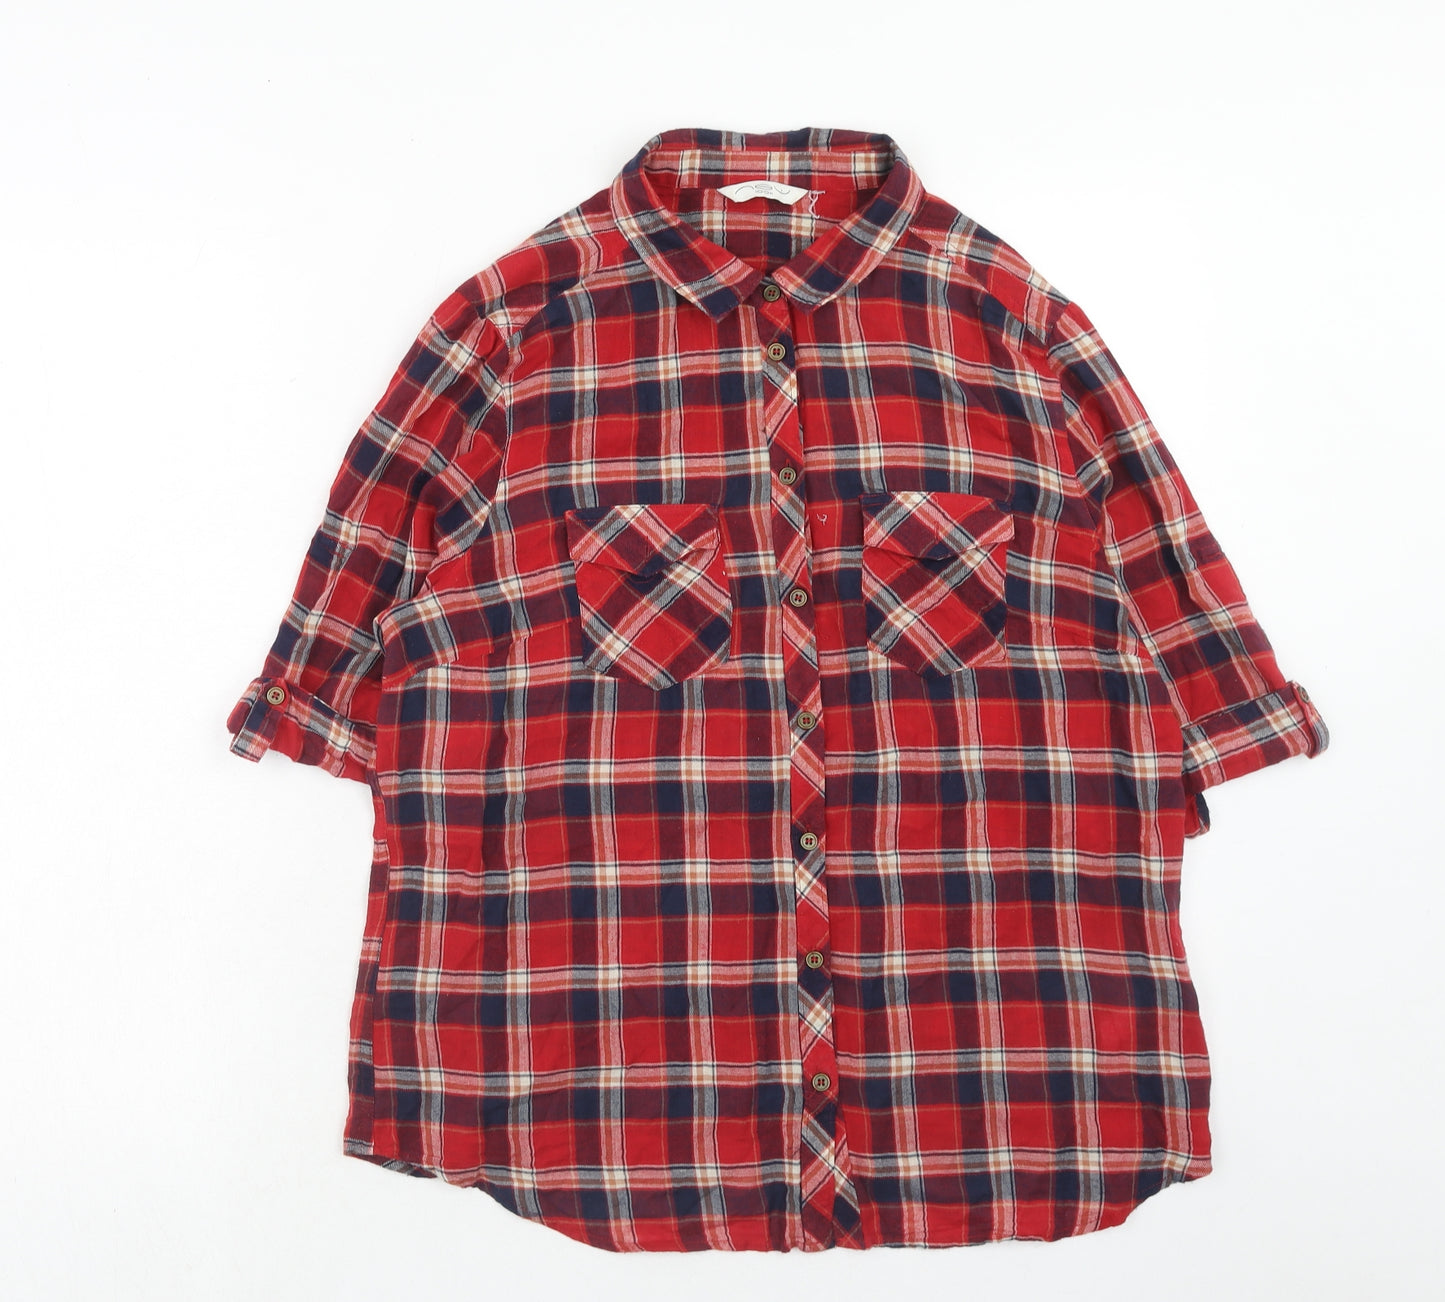 New Look Womens Red Plaid Cotton Basic Button-Up Size 16 Collared